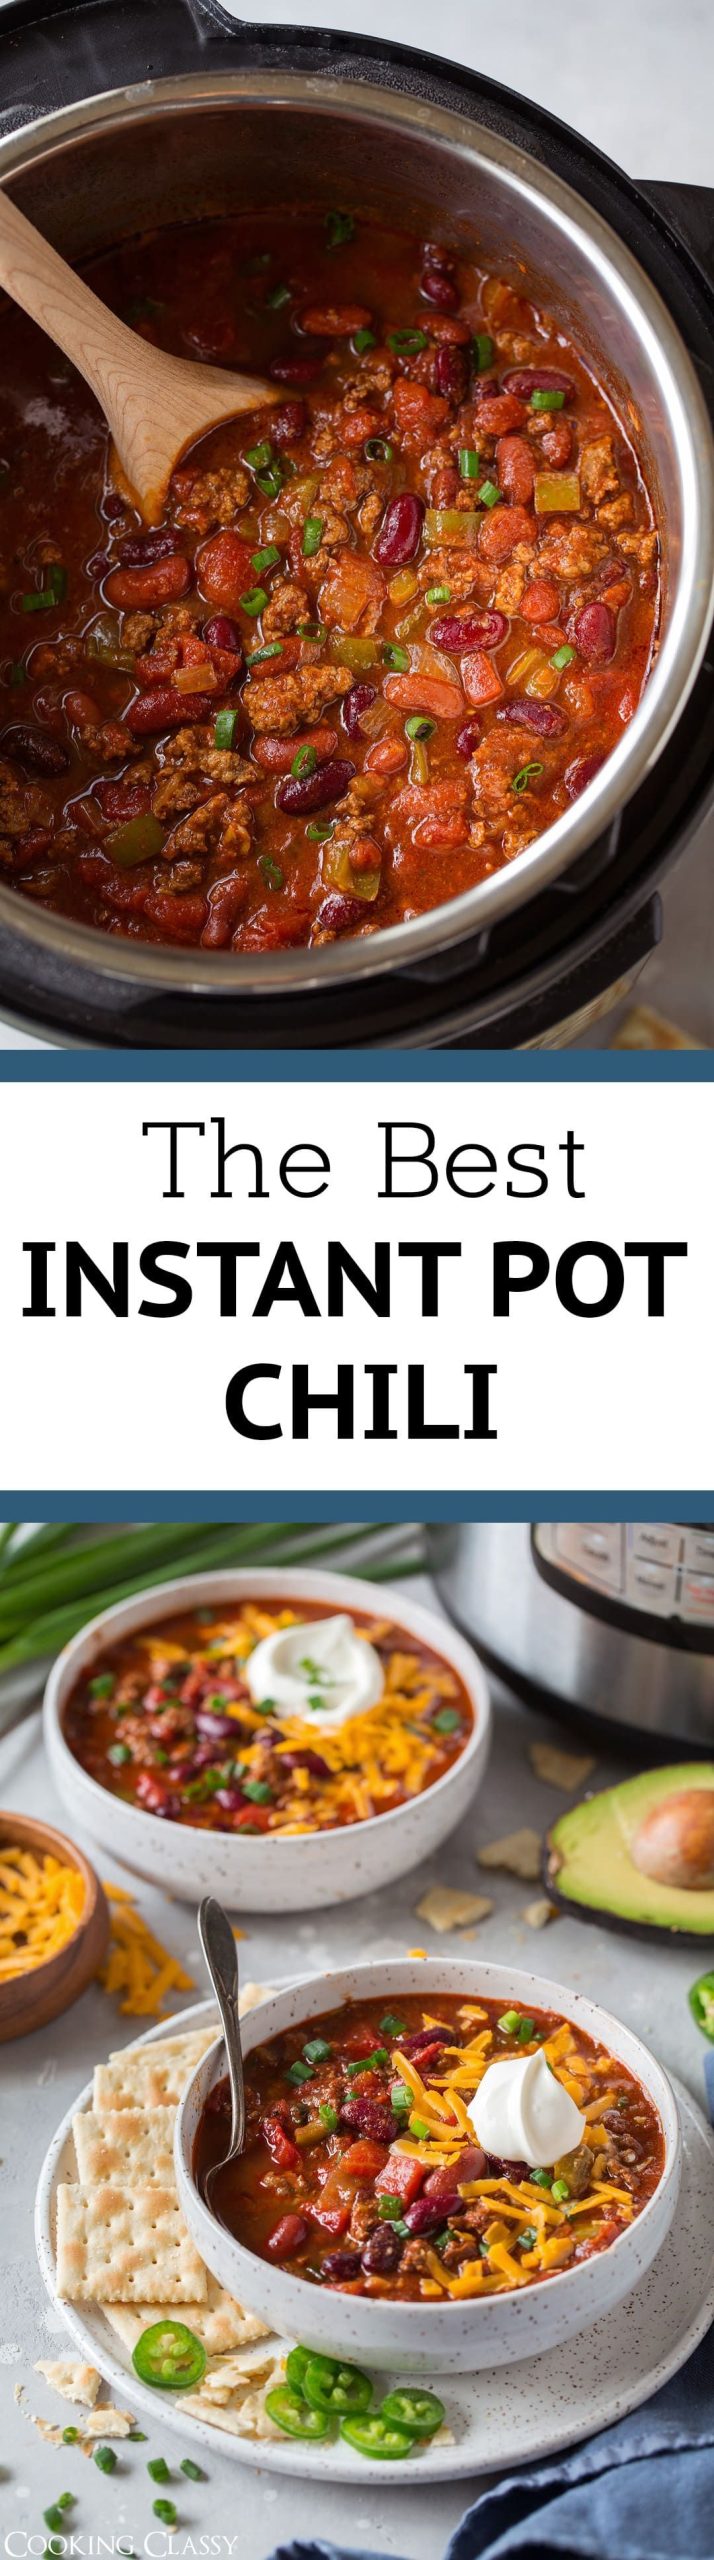 How Long To Cook Chili In Instant Pot